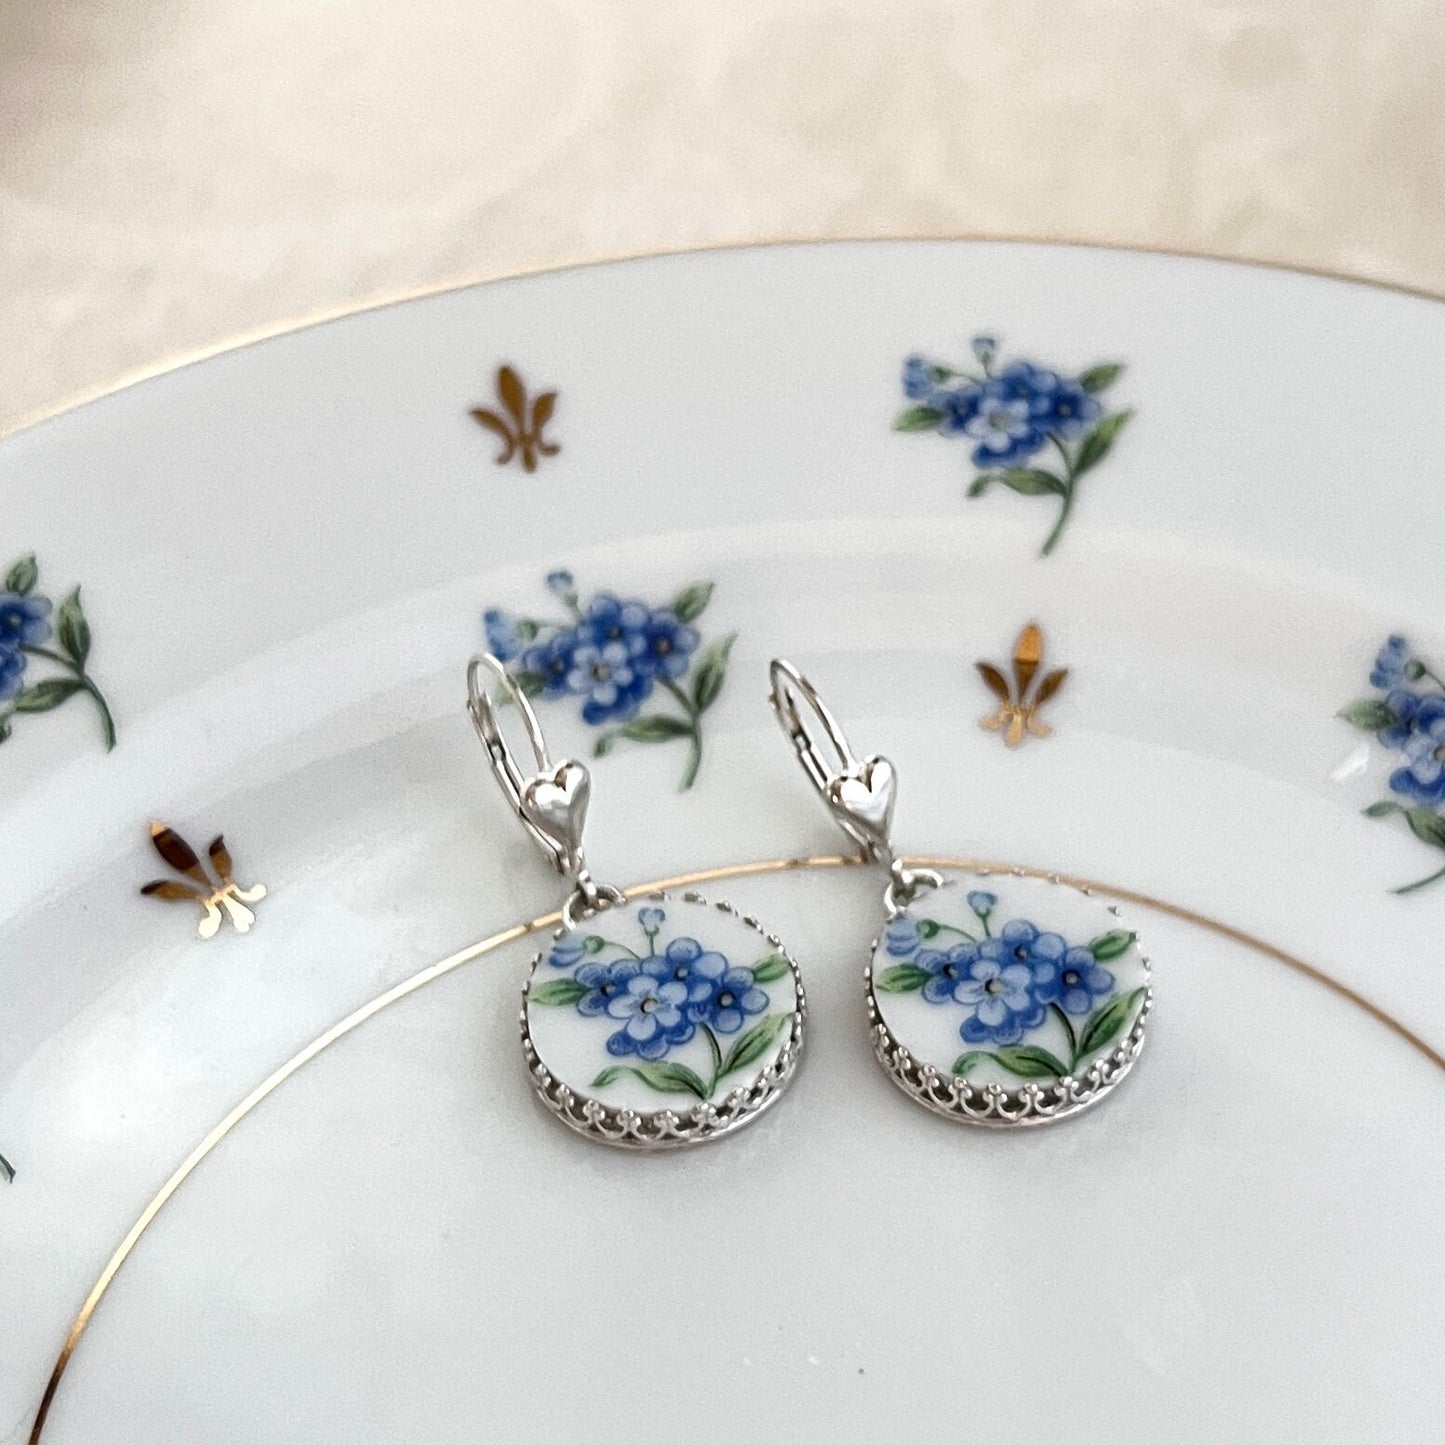 Forget Me Not Me Not Flower Earrings, Romantic Gift for Girlfriend, Sterling Silver Broken China Jewelry,  Gifts for Women